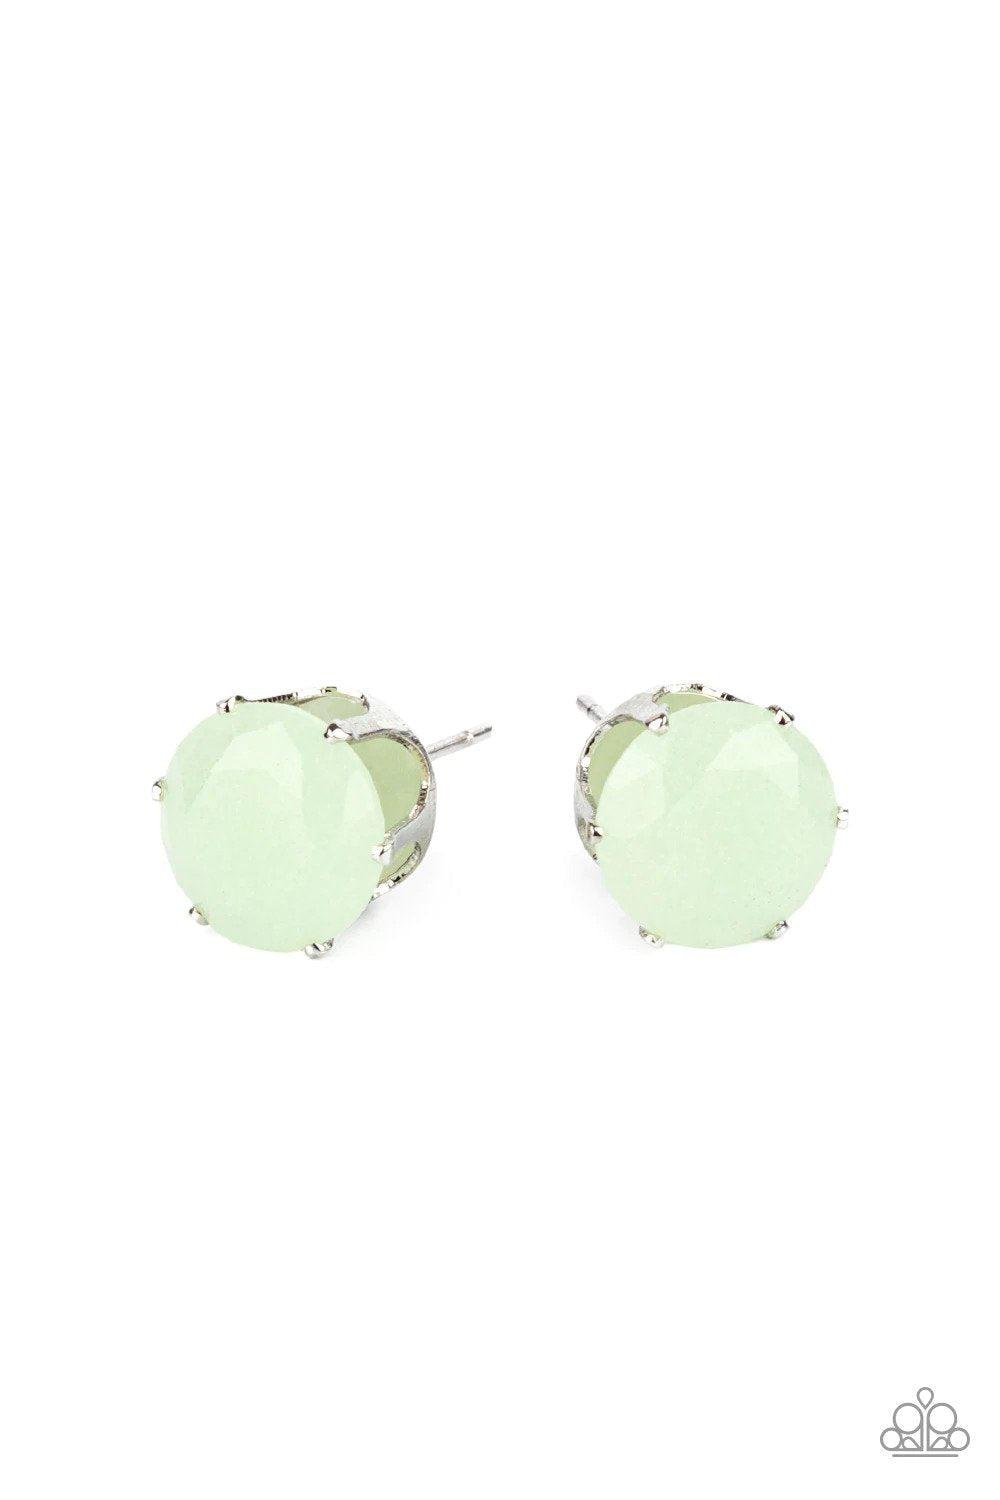 Simply Serendipity Green Earrings - Paparazzi Accessories- lightbox - CarasShop.com - $5 Jewelry by Cara Jewels